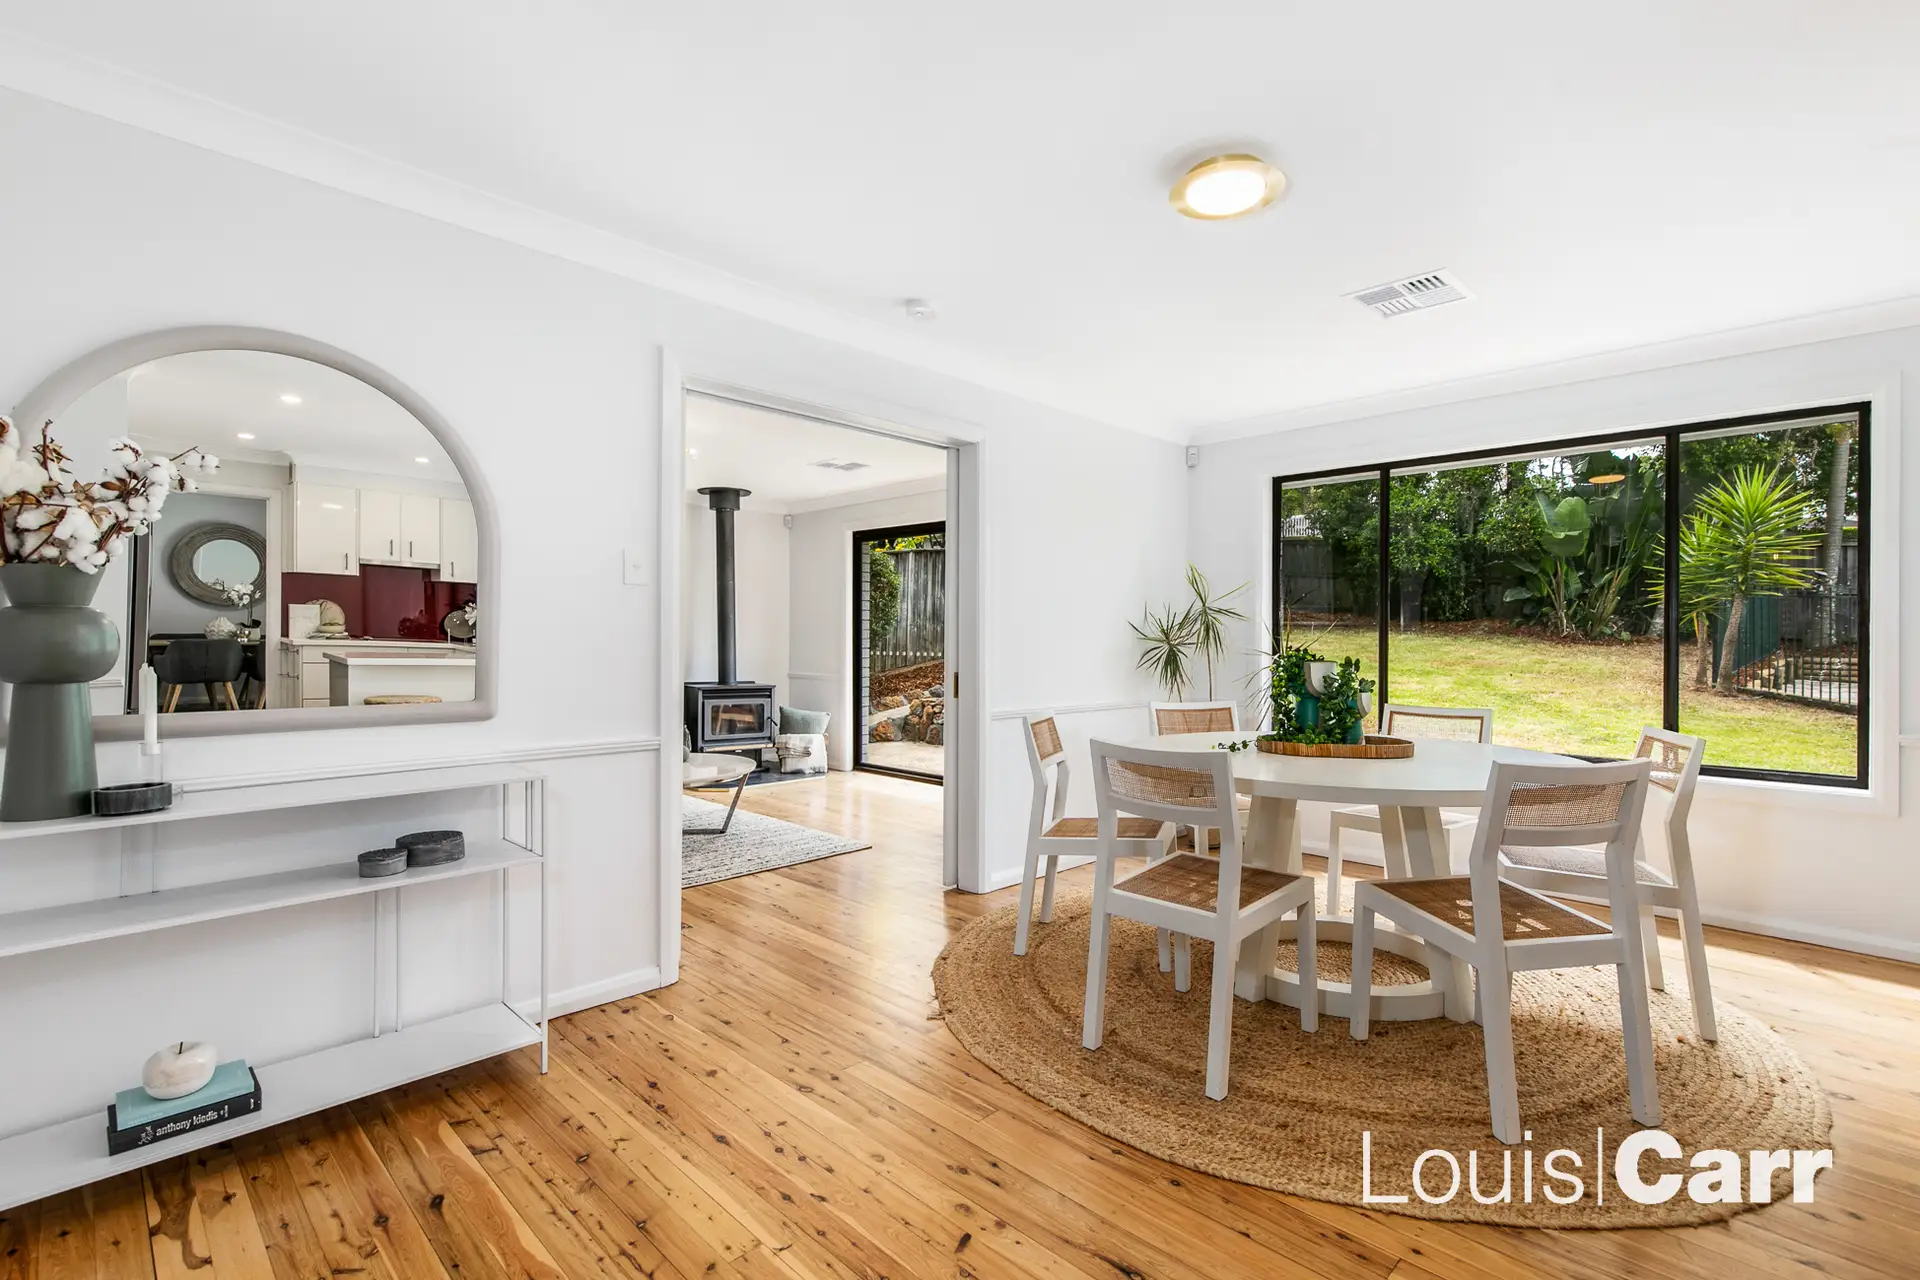 Photo #6: 12 Radley Place, Cherrybrook - Sold by Louis Carr Real Estate